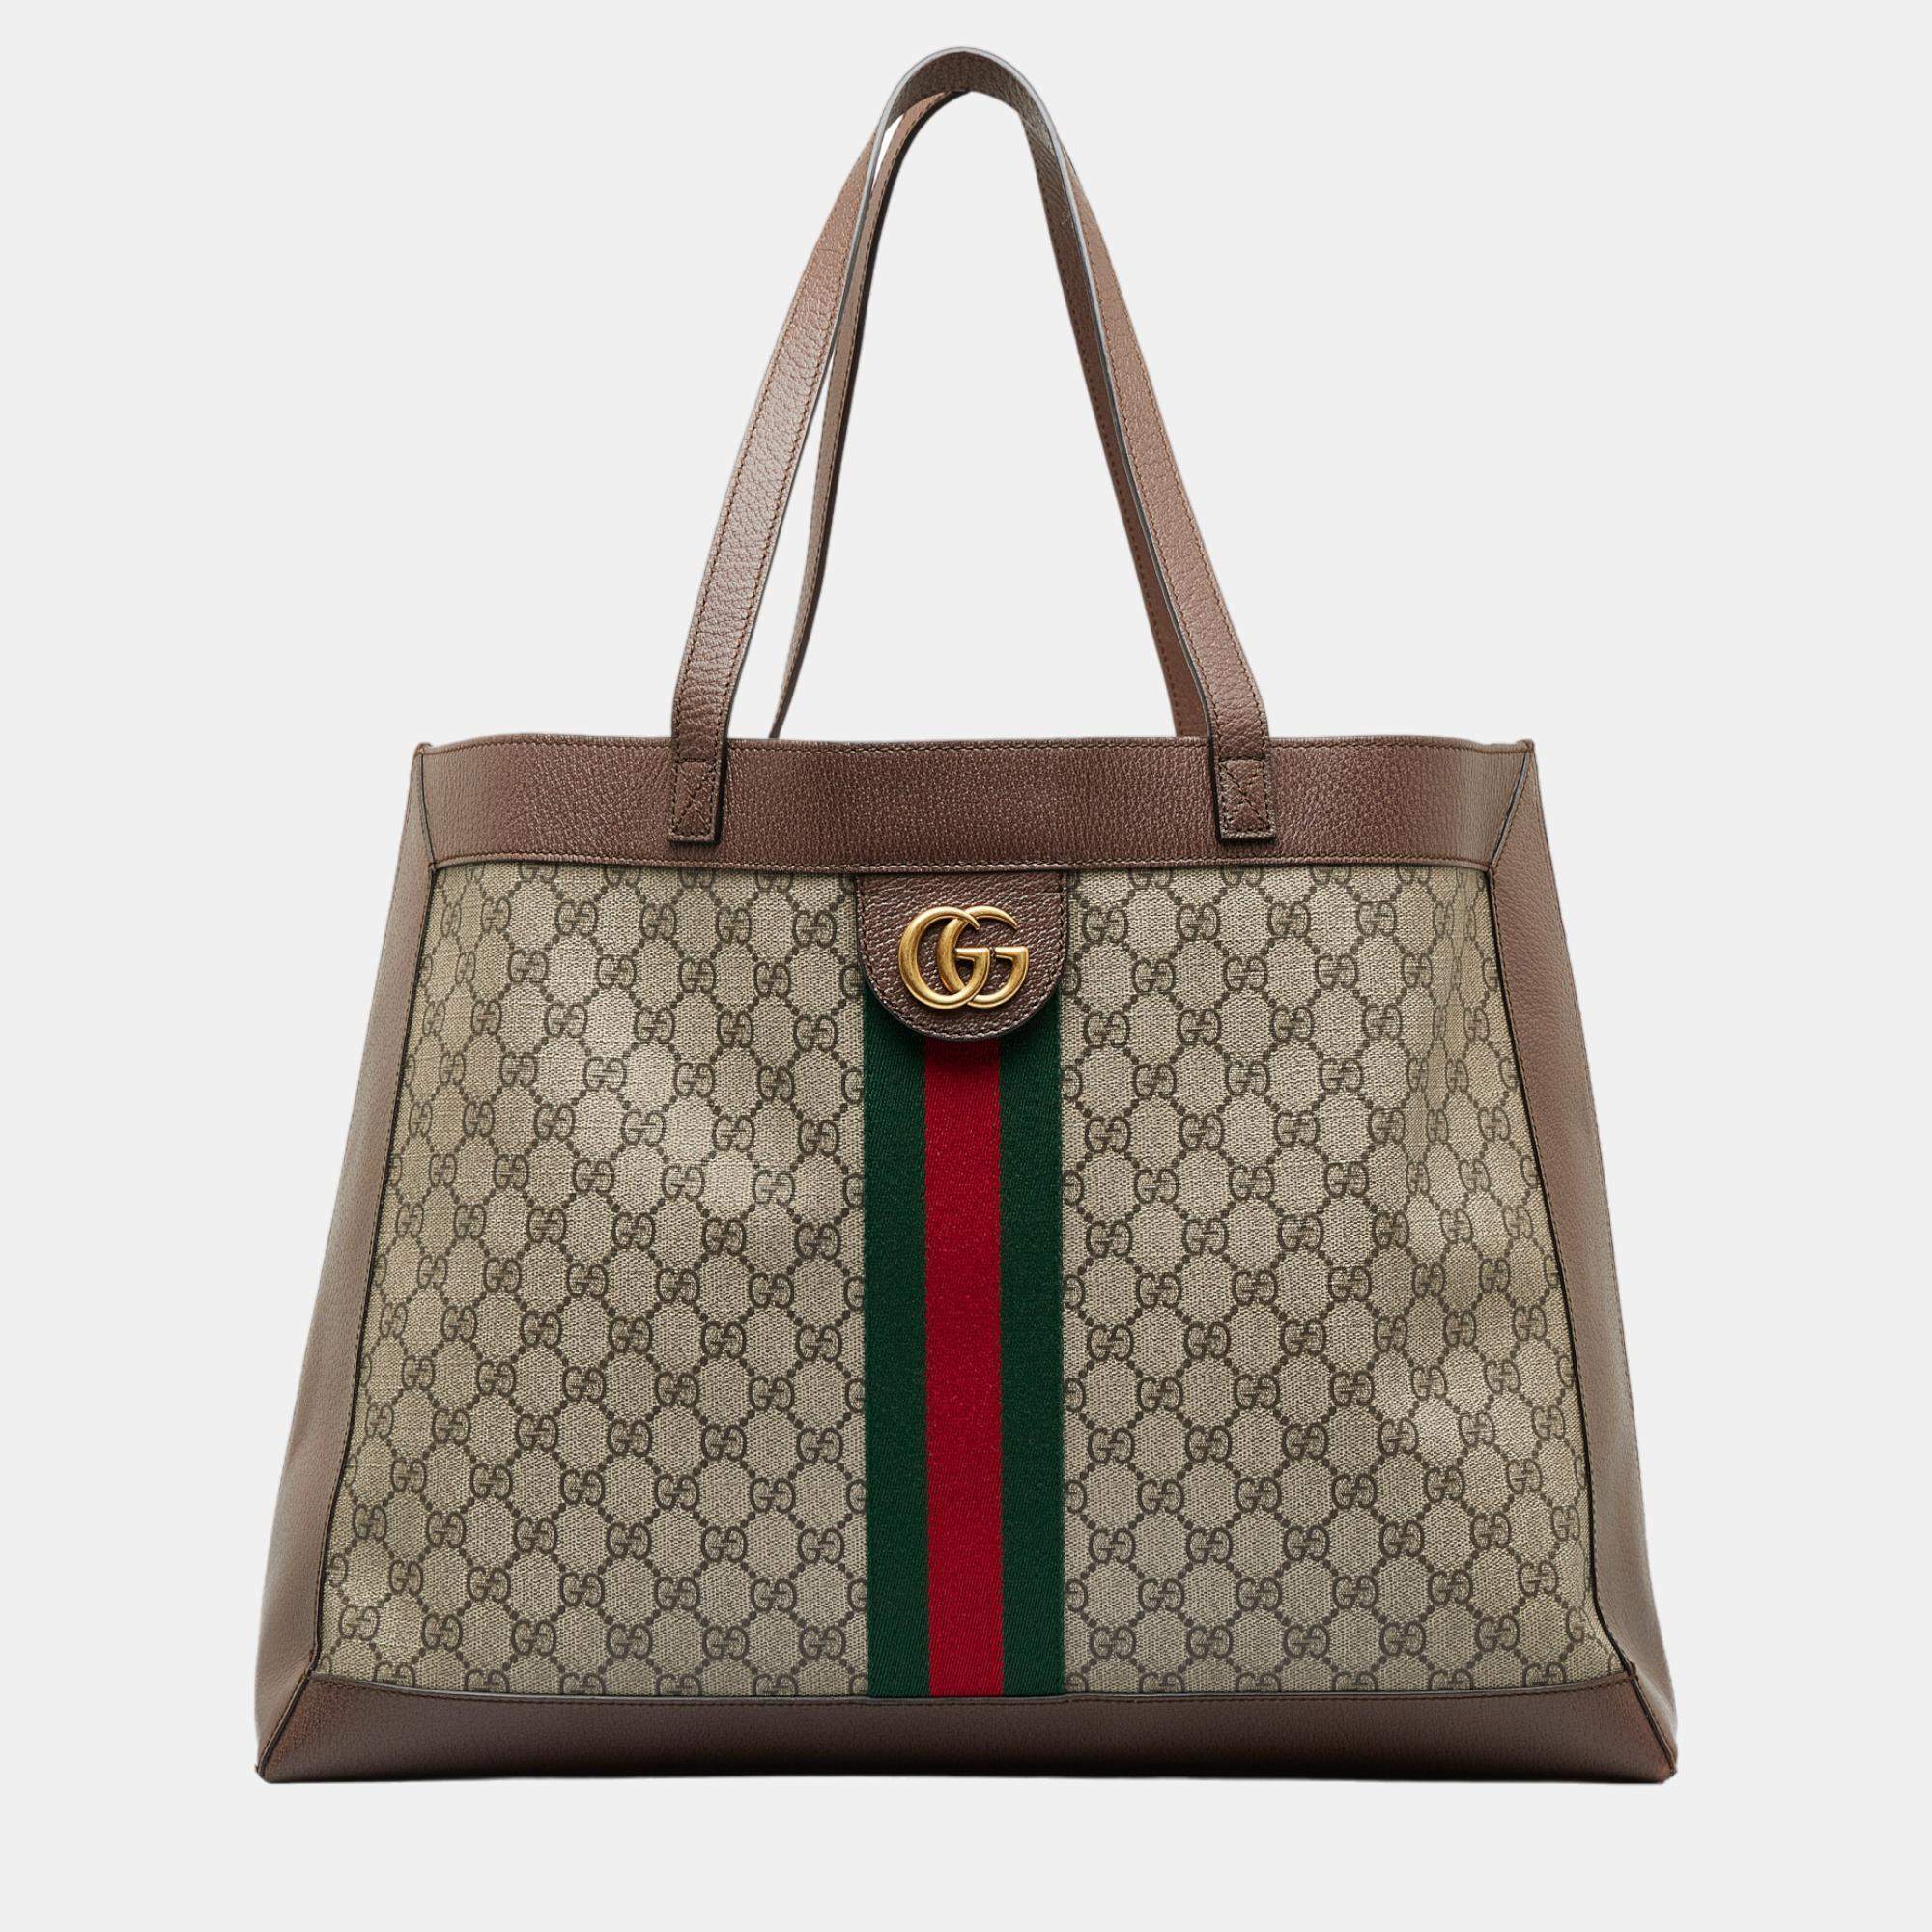 Gucci Men's Ophidia Leather-Trimmed Tote Bag